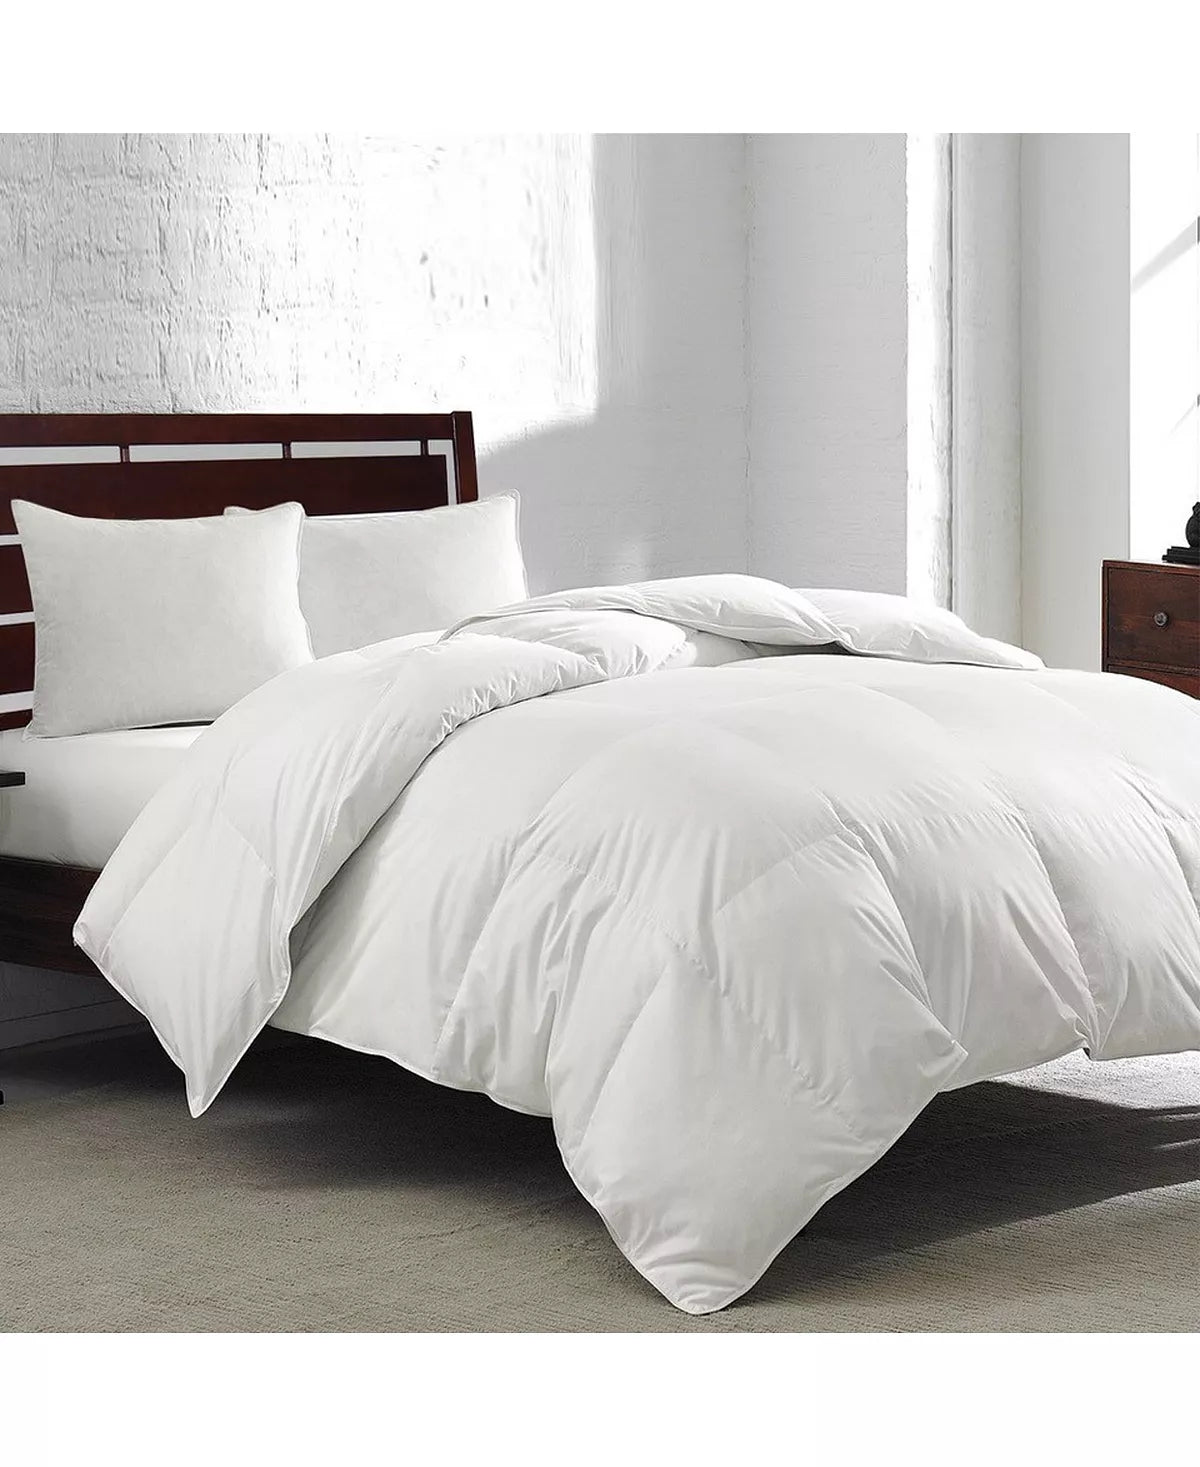 ROYAL LUXE White Goose Feather & Down 240-Thread Count Full/Queen Comforter